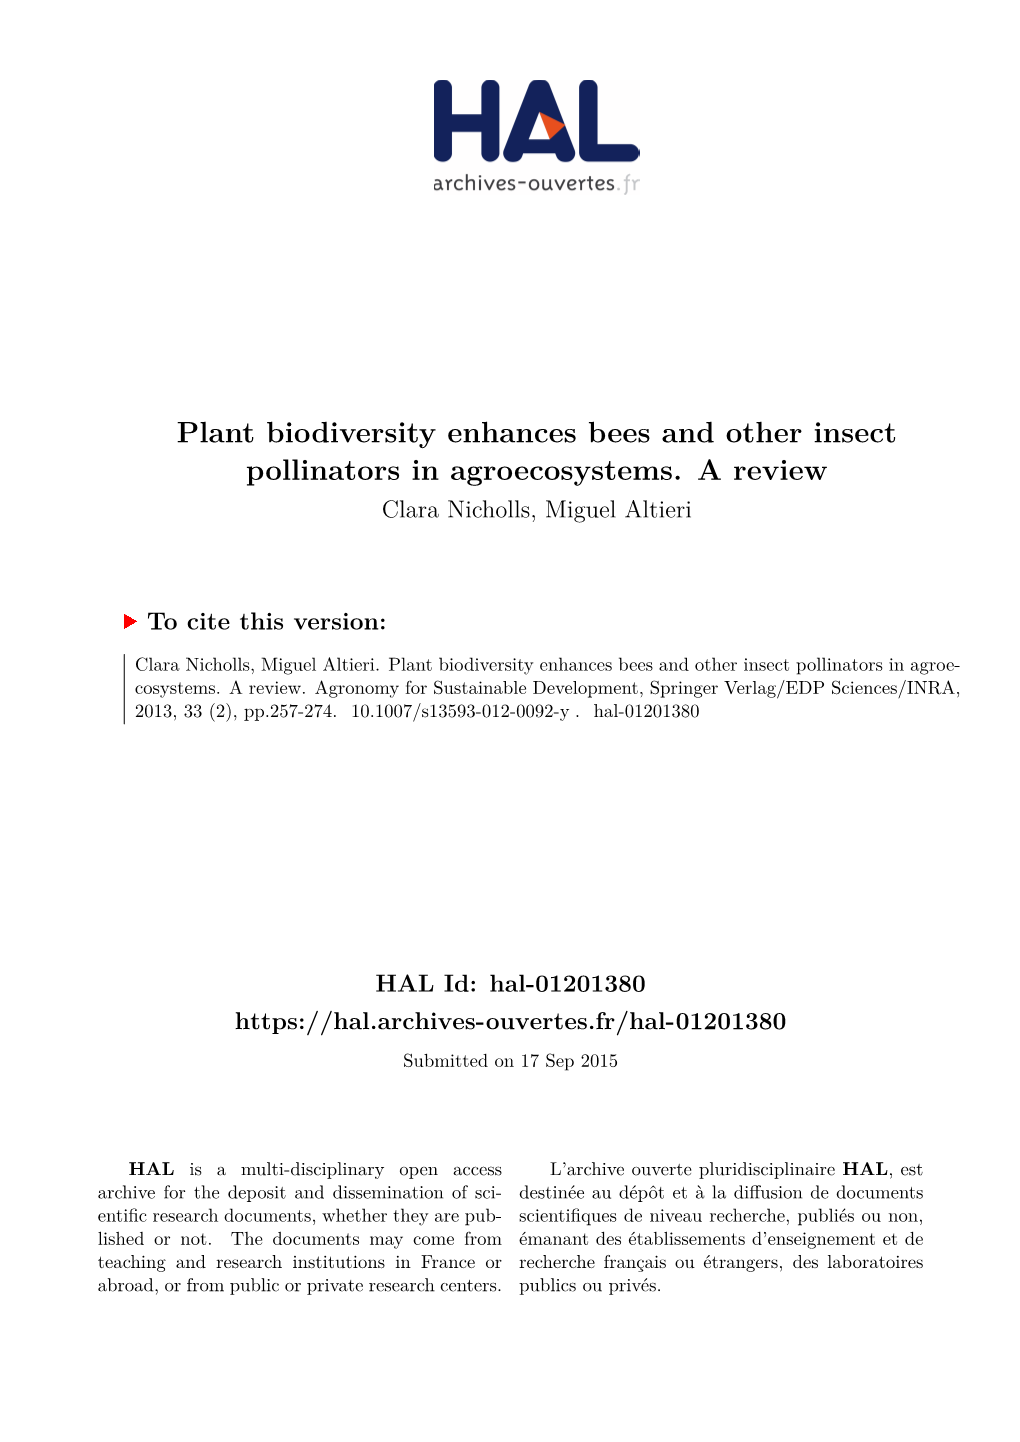 Plant Biodiversity Enhances Bees and Other Insect Pollinators in Agroecosystems